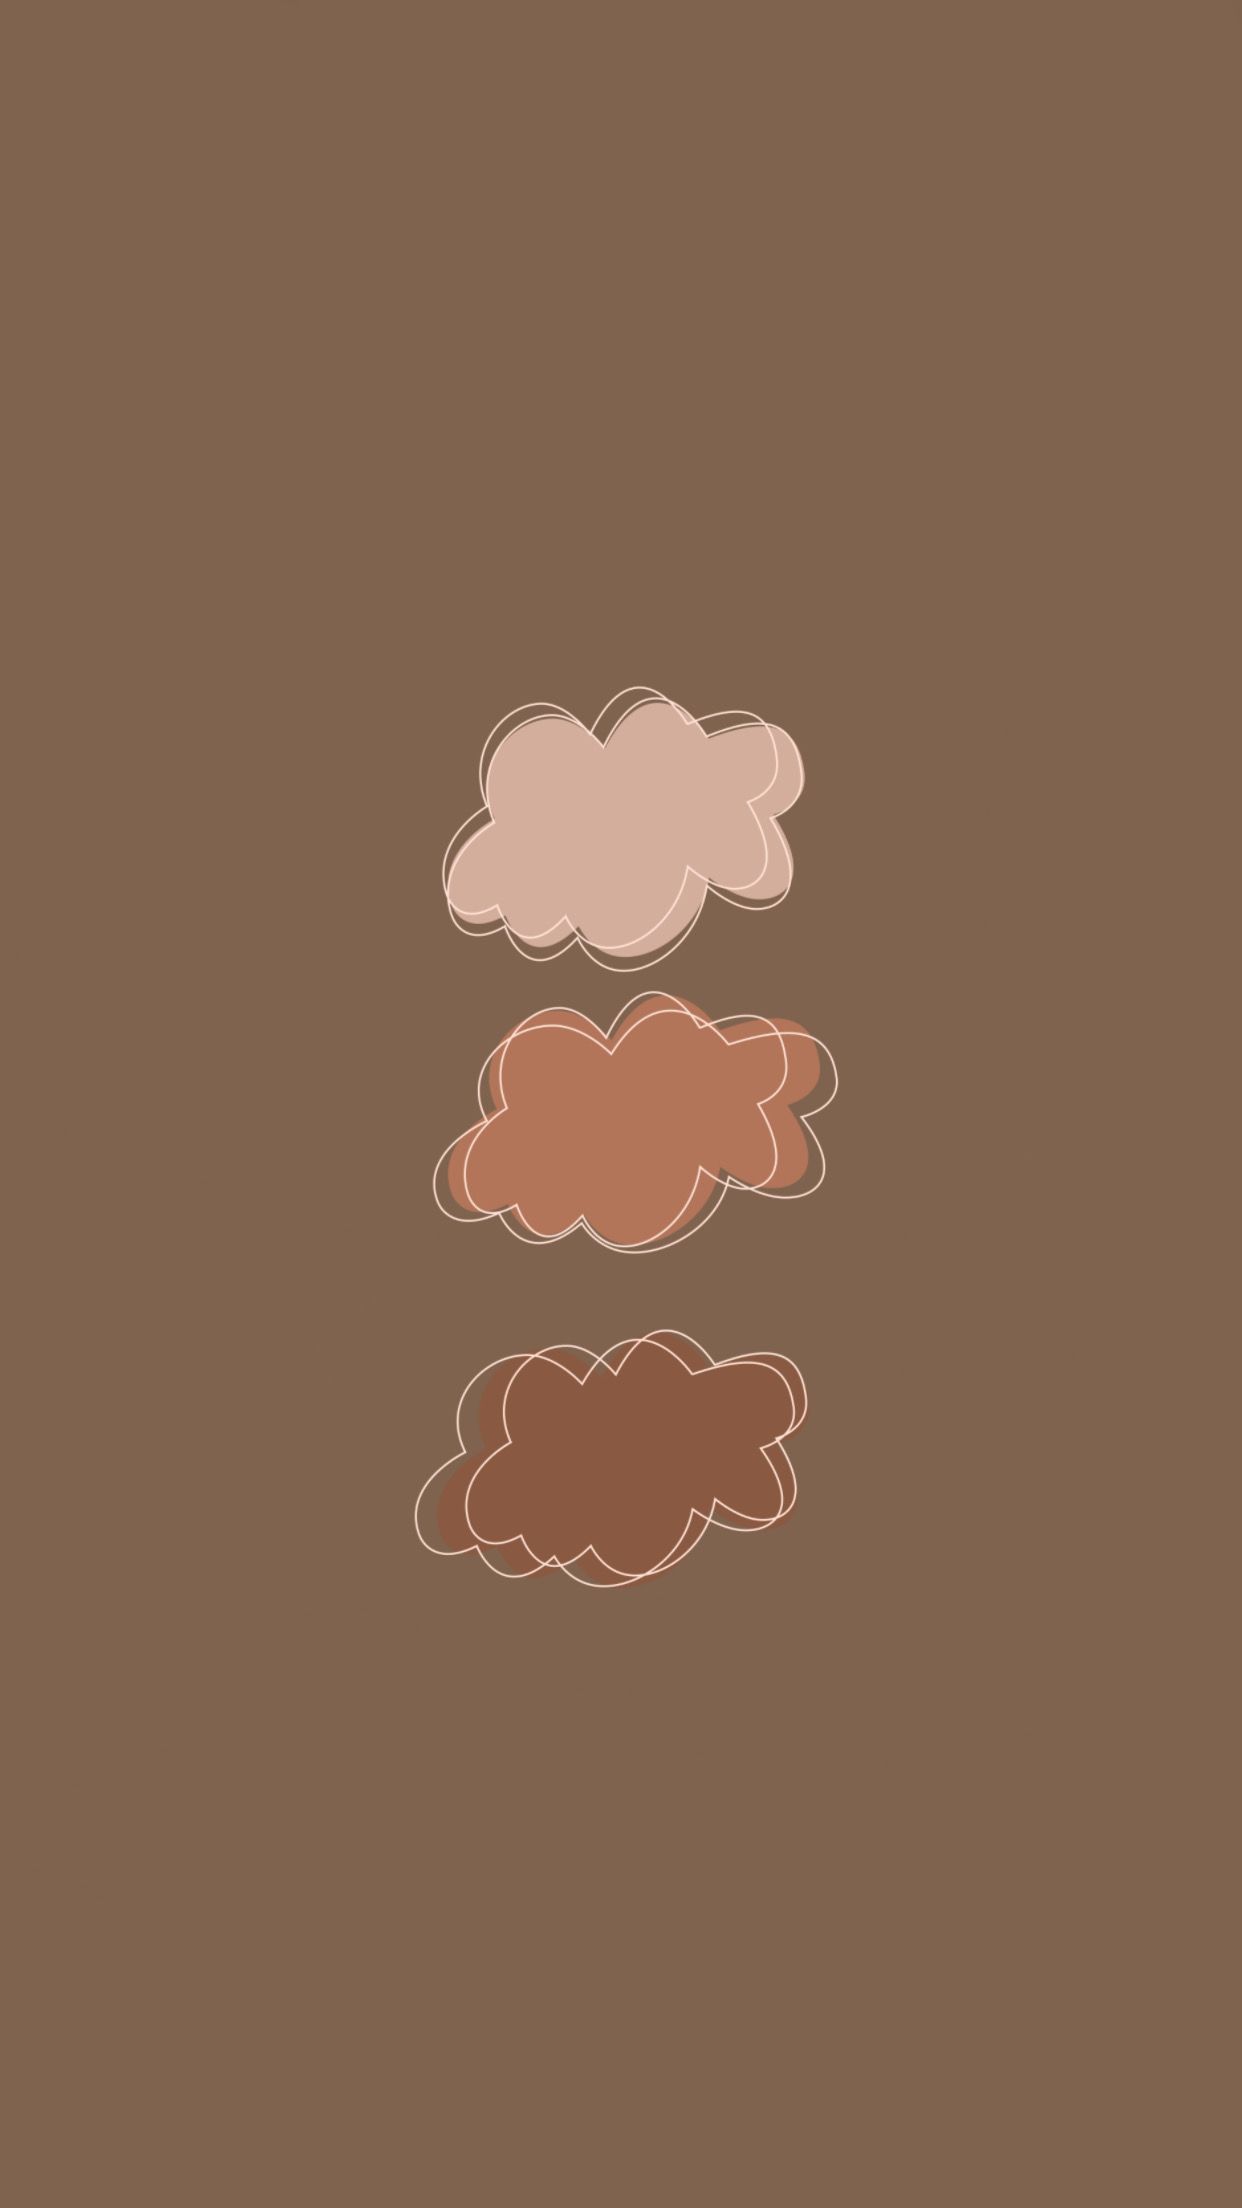 Aesthetic phone background of three clouds in different shades of brown - Brown